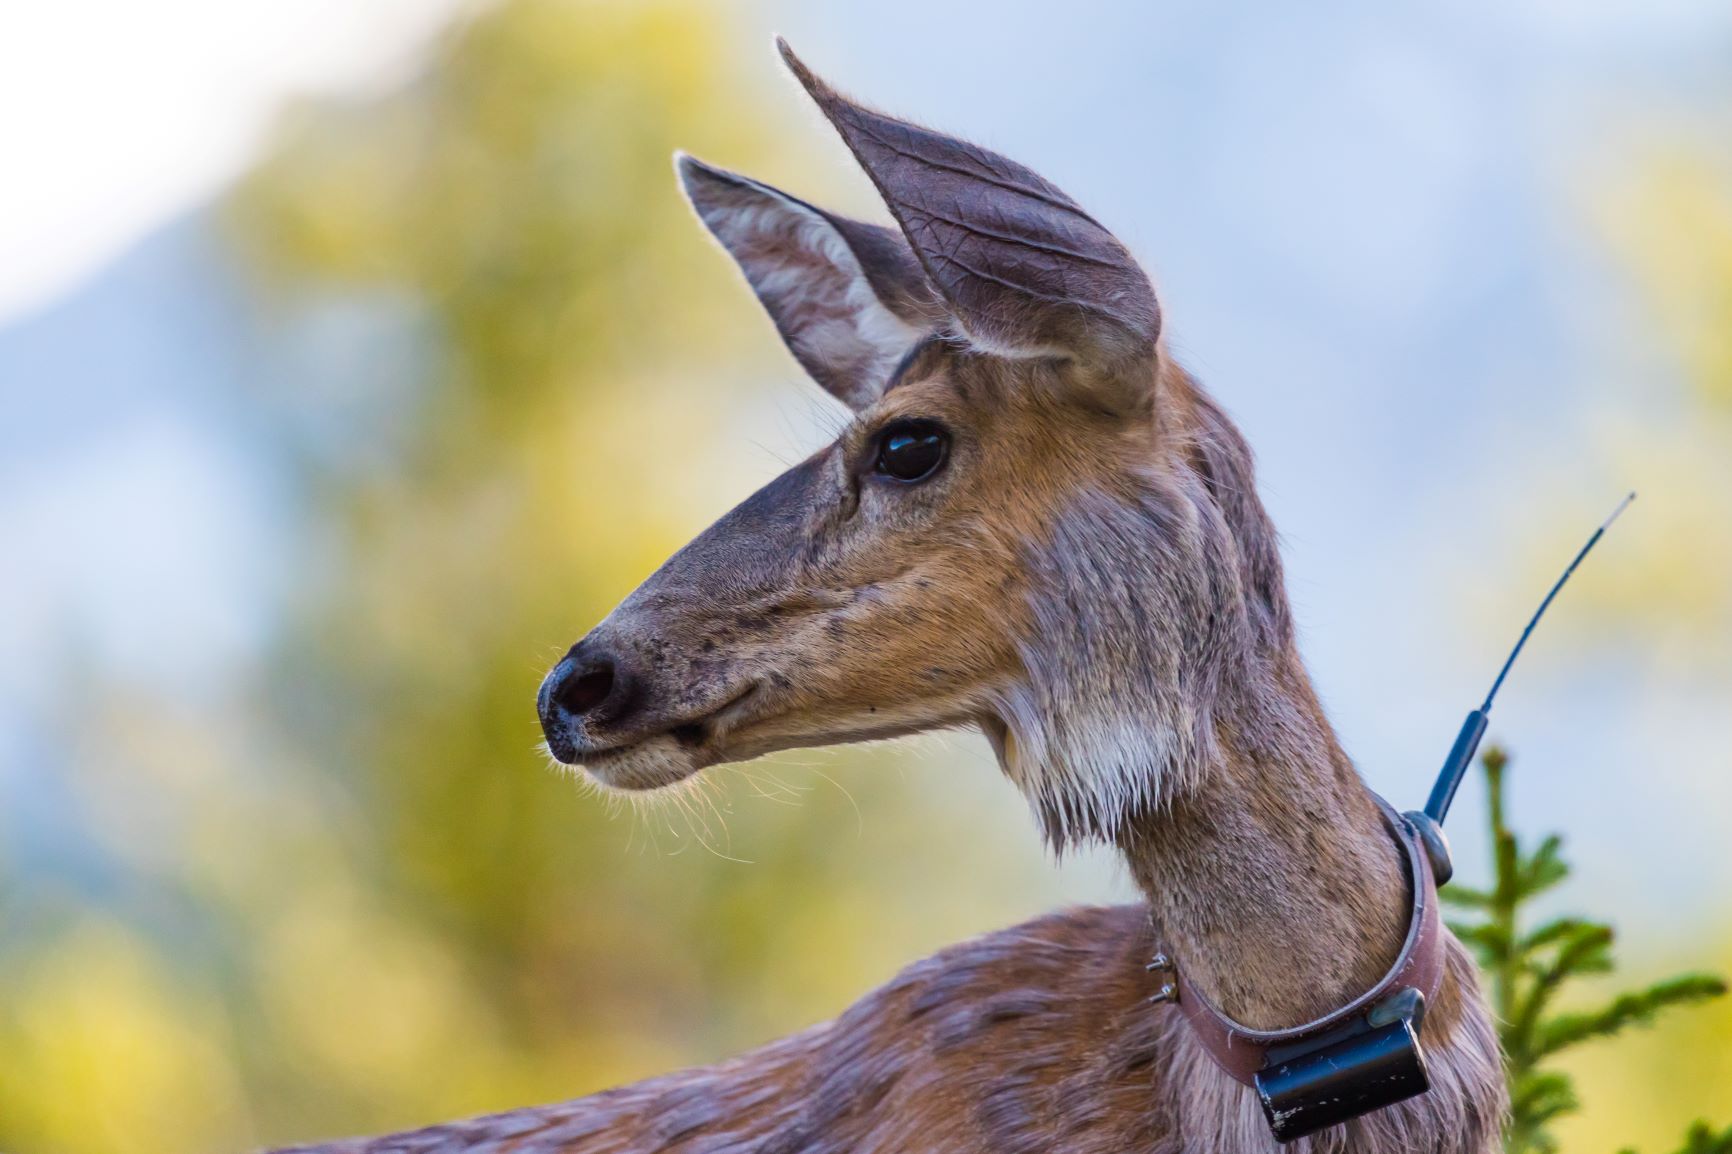 Deer wearing a radio collar for scientific research